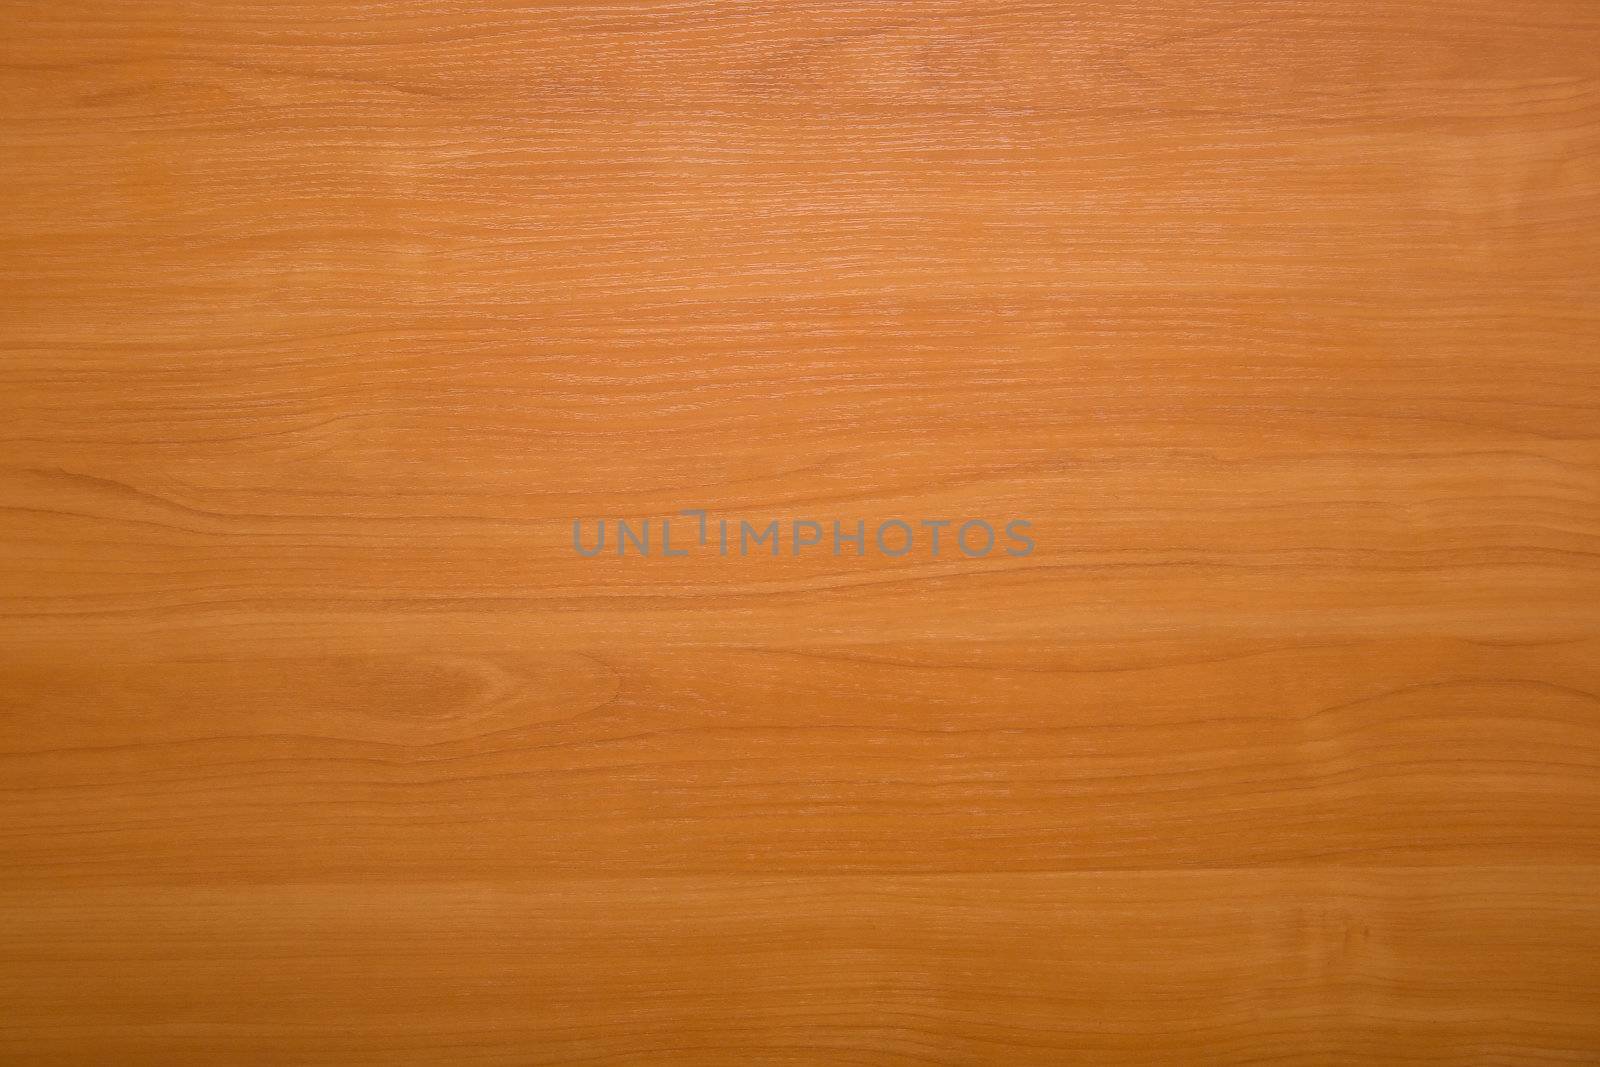 Highly detailed texture of a wooden surface